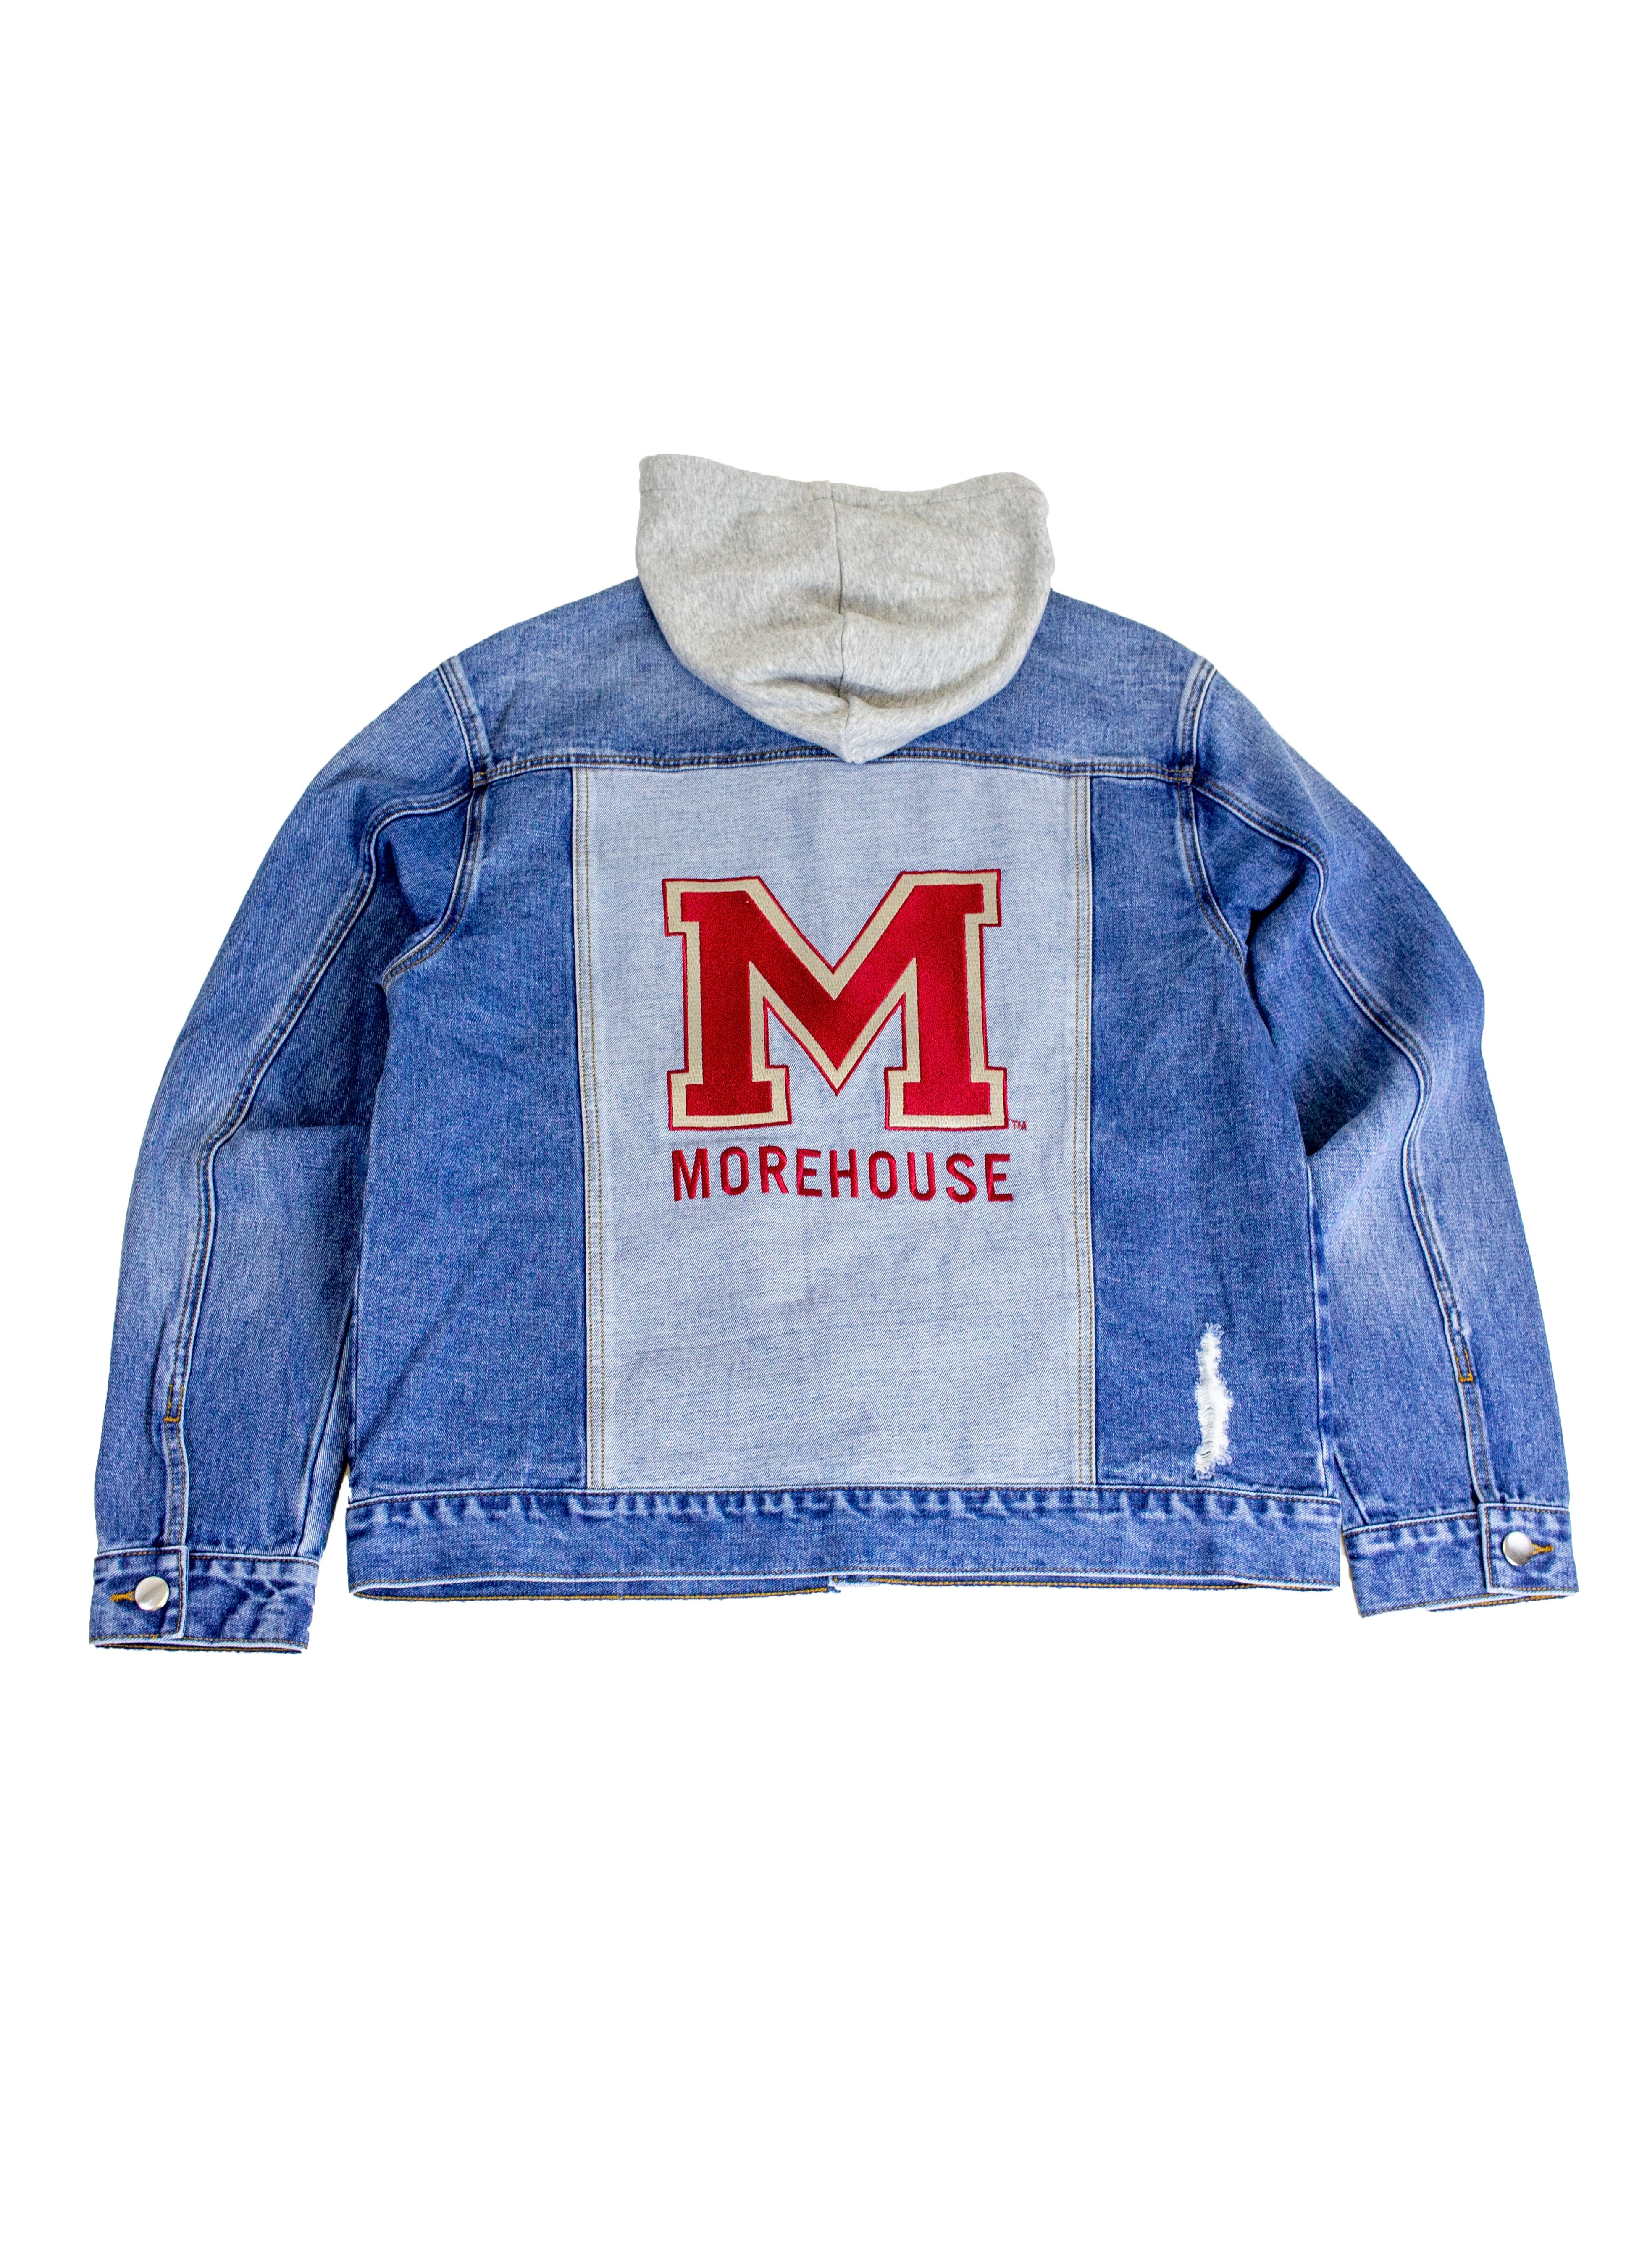 Morehouse Tigers Youth Denim Jacket